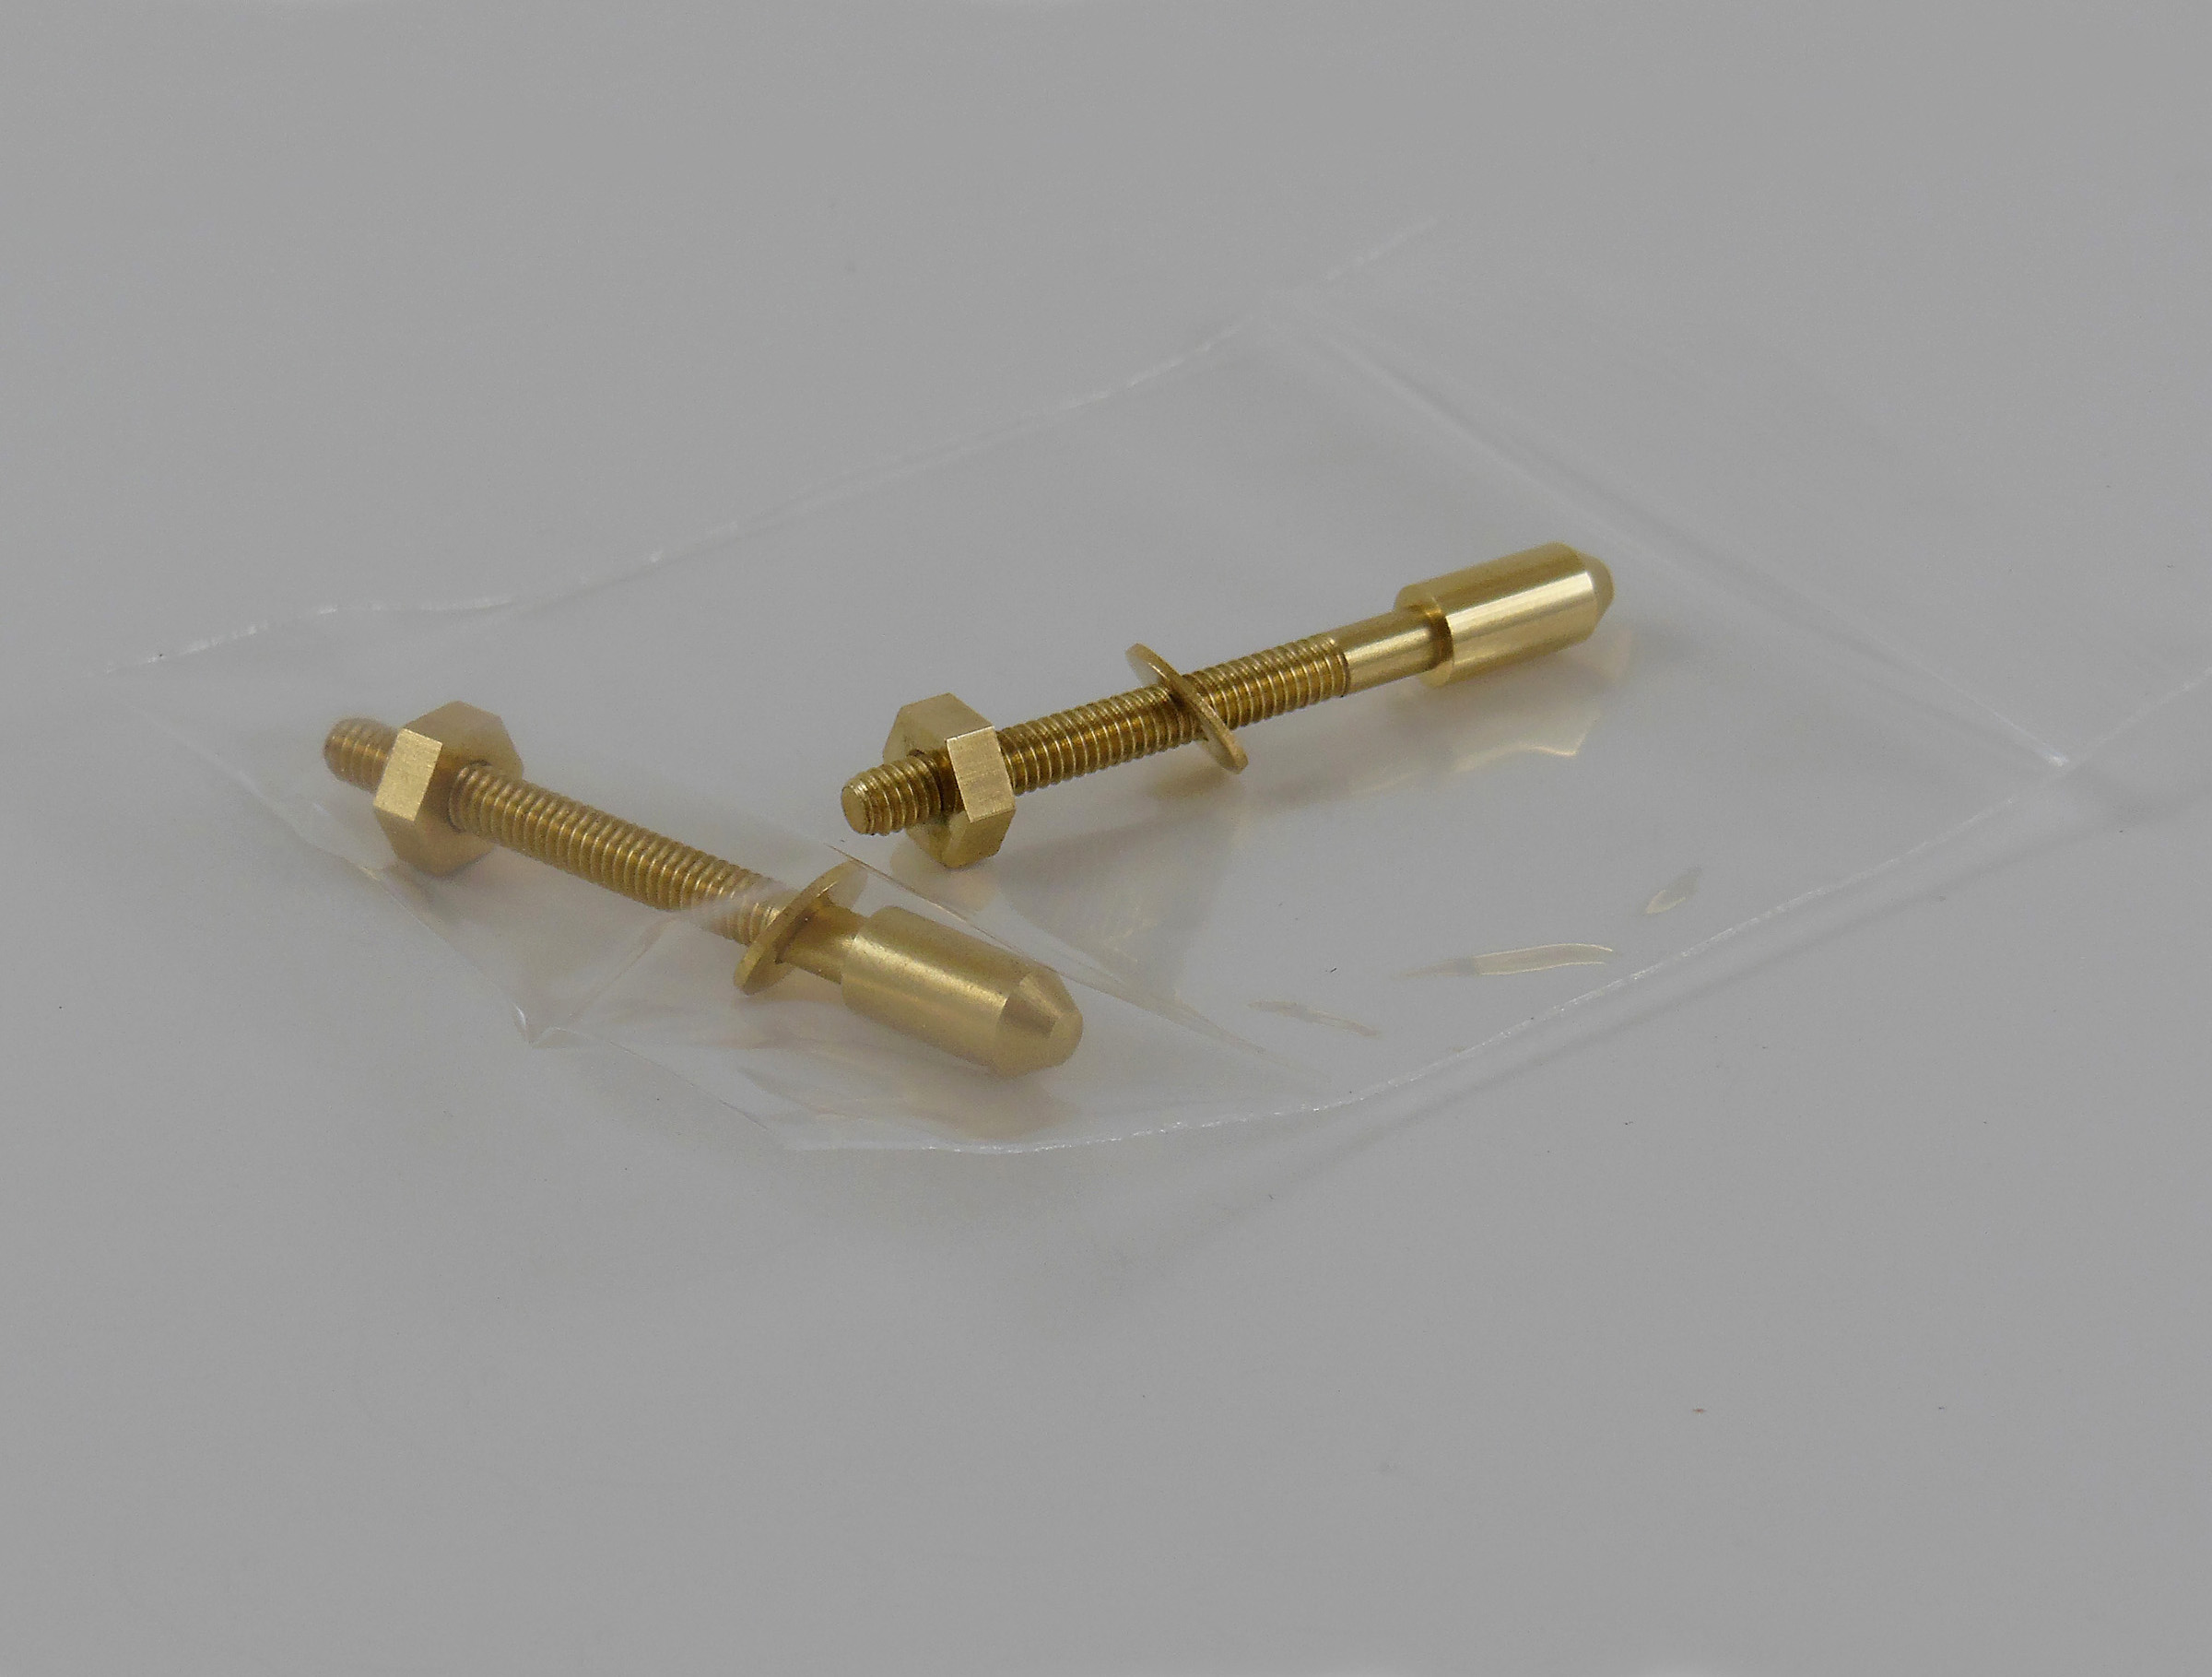 Brass Contact Stops (Package of 2)